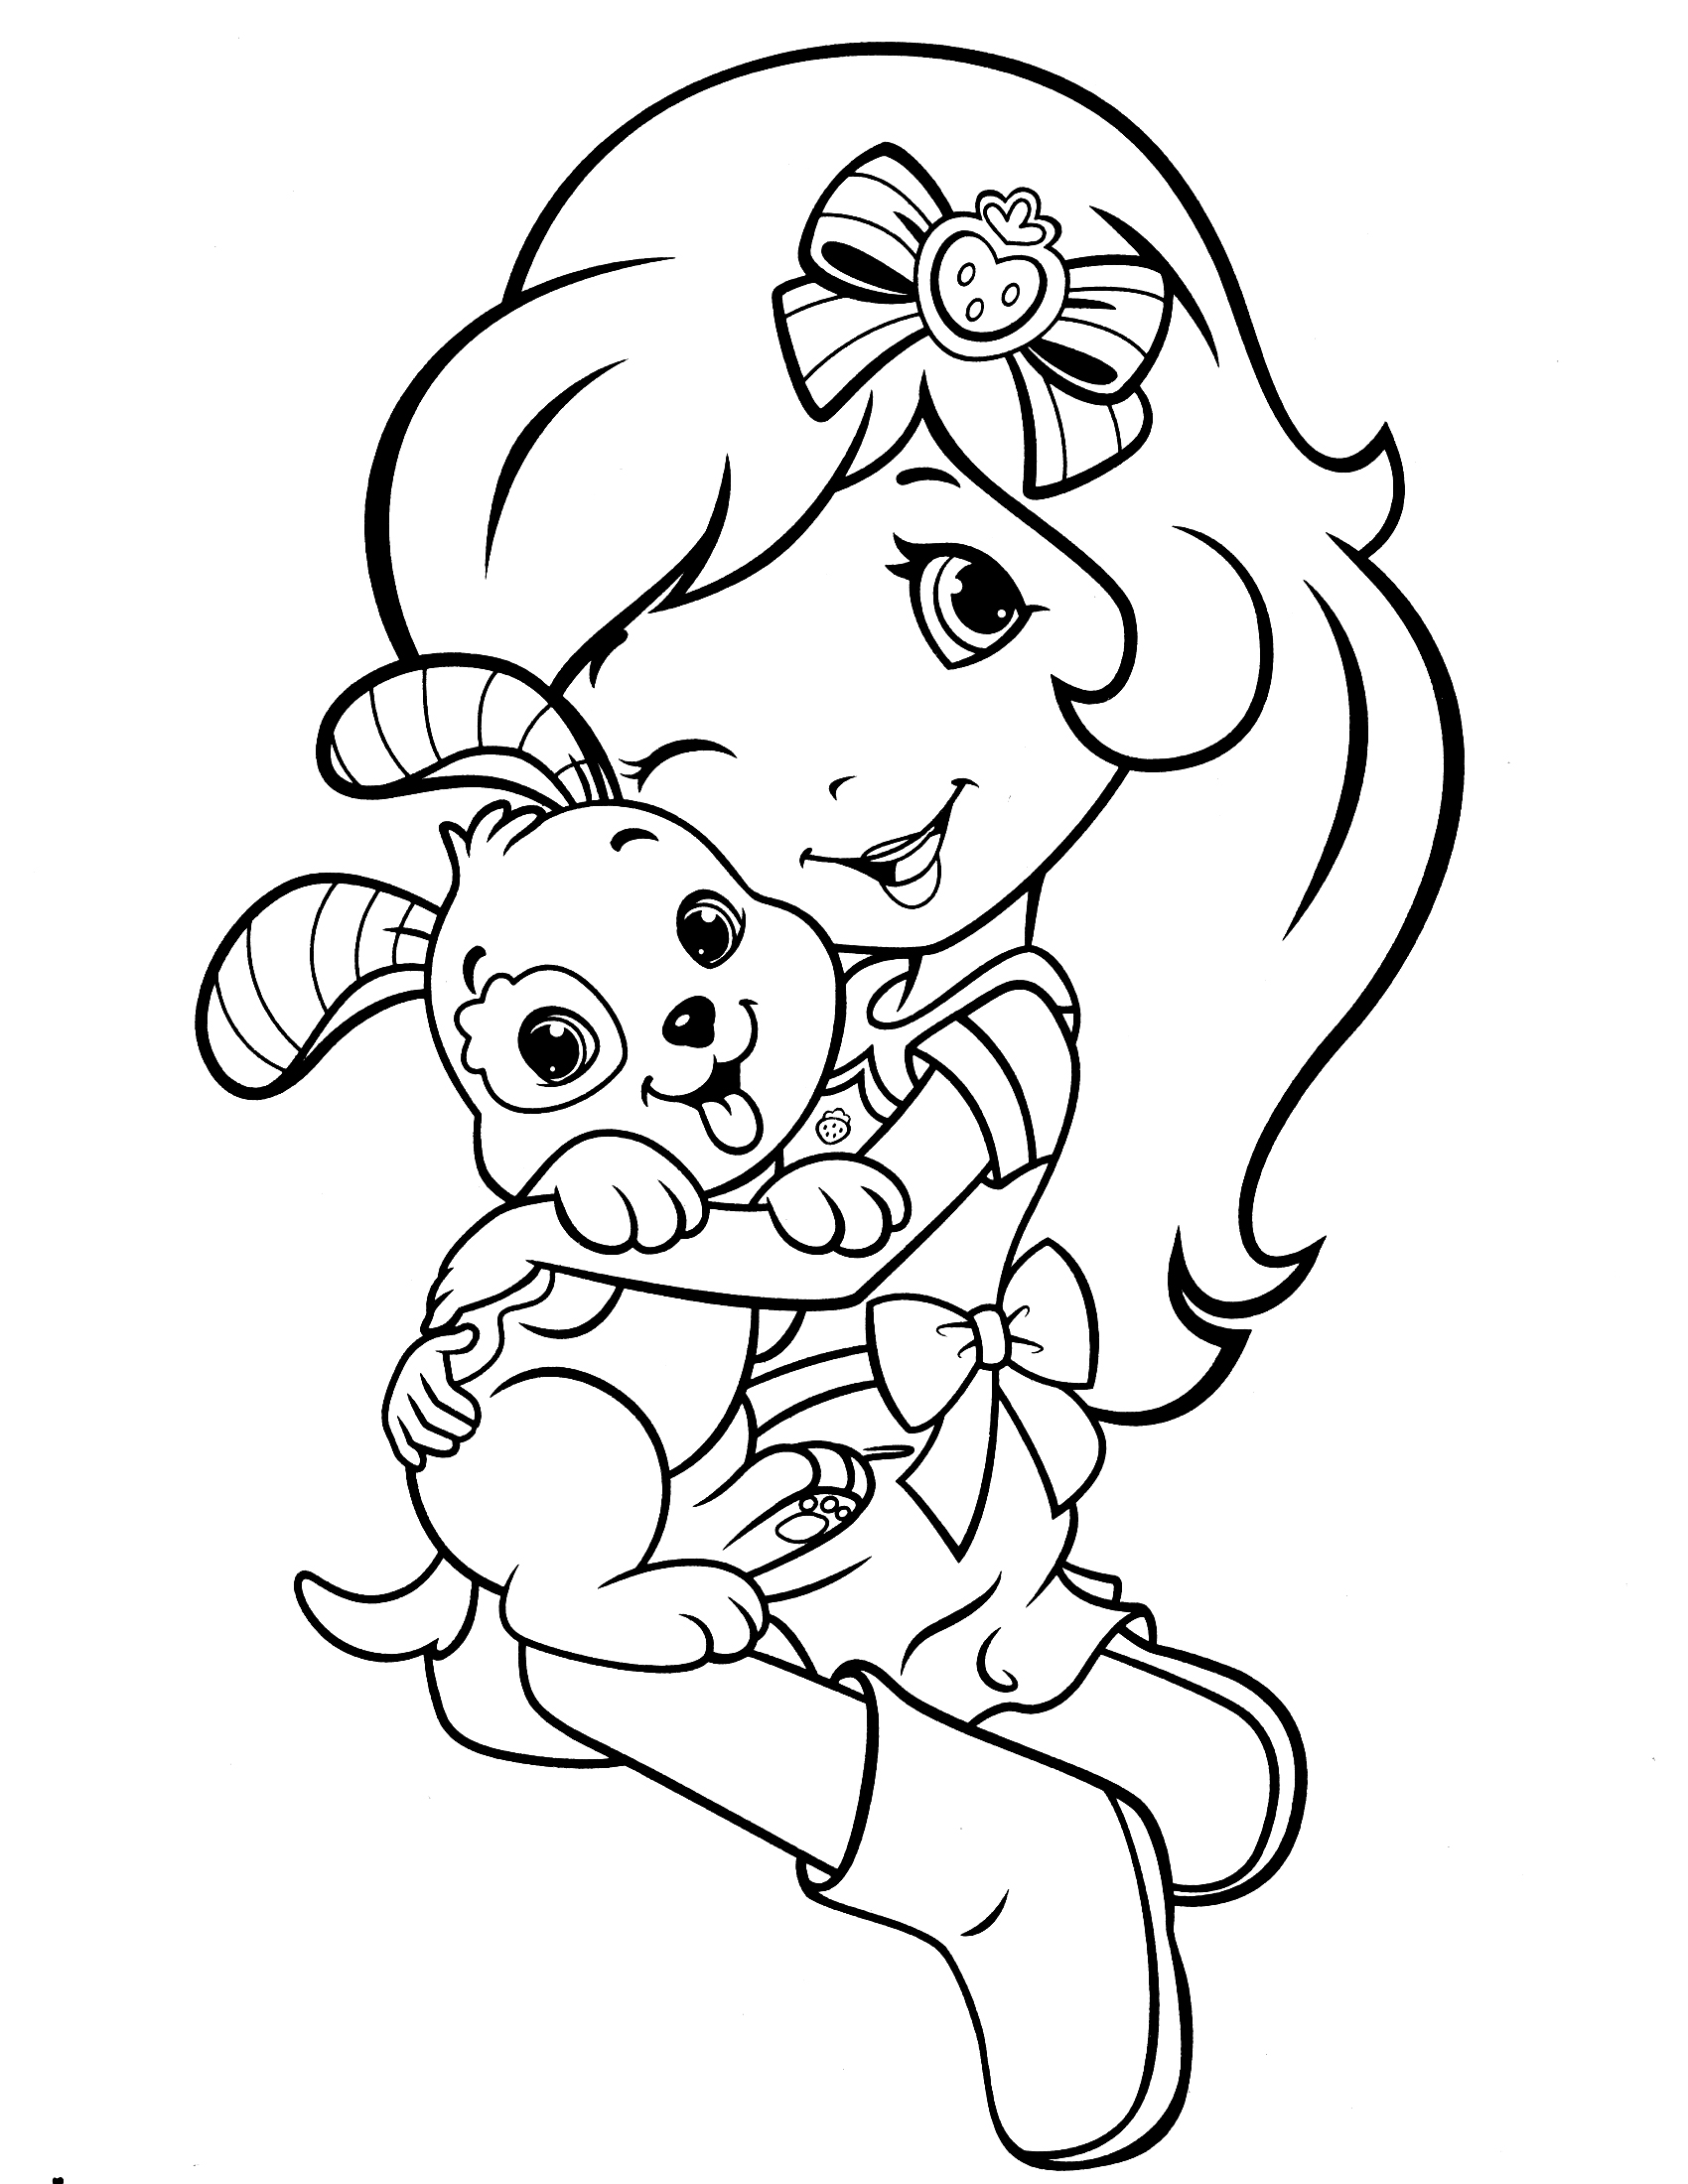  Strawberry Shortcake Coloring Pages / Cool coloring pages / 25